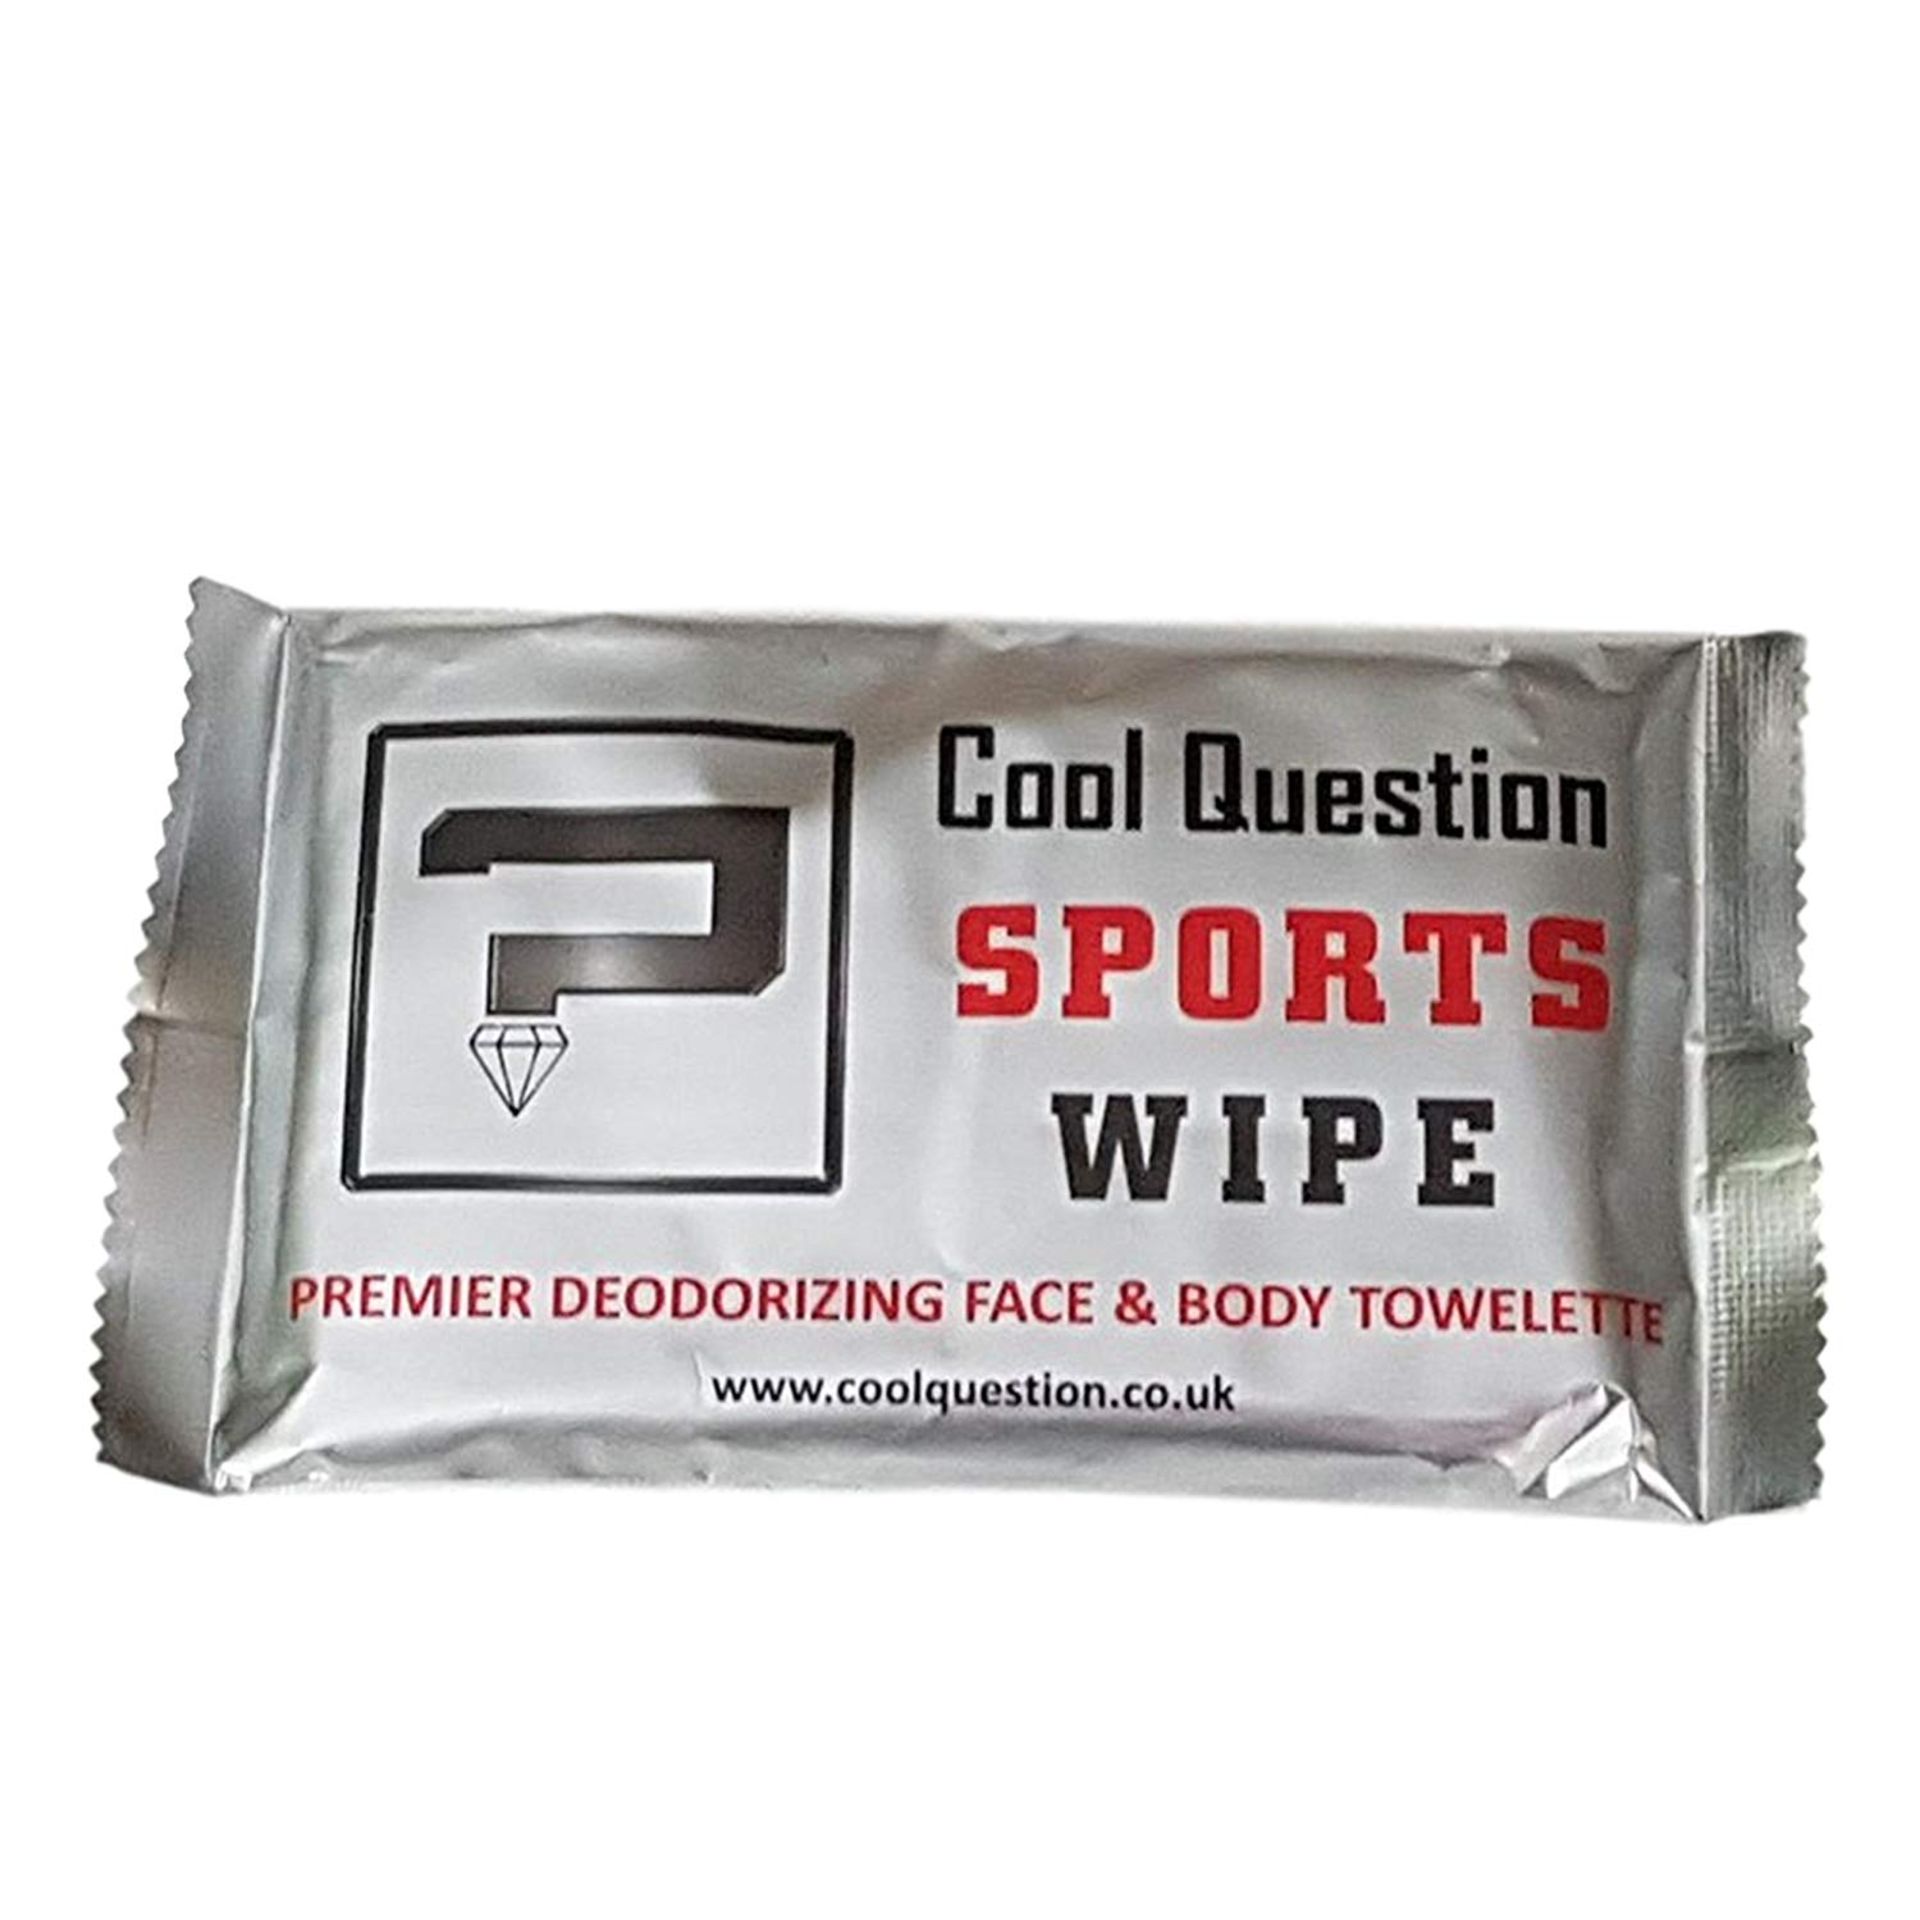 25x NEW Cool Question Individually Wrapped Adult Sports Towellete